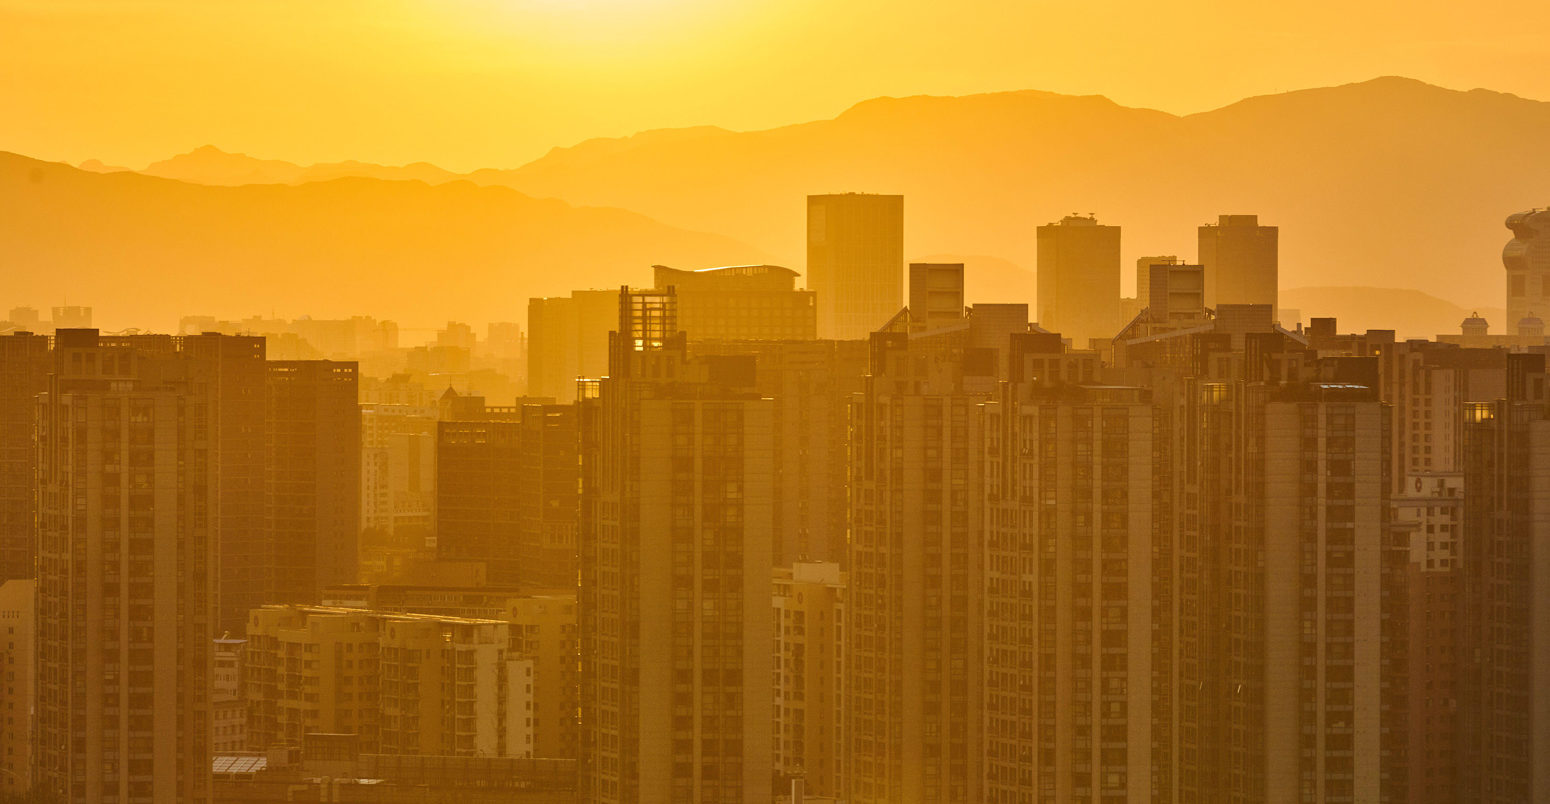 Beijing landmarks, including the China Zun, stand to form a skyline at sunset